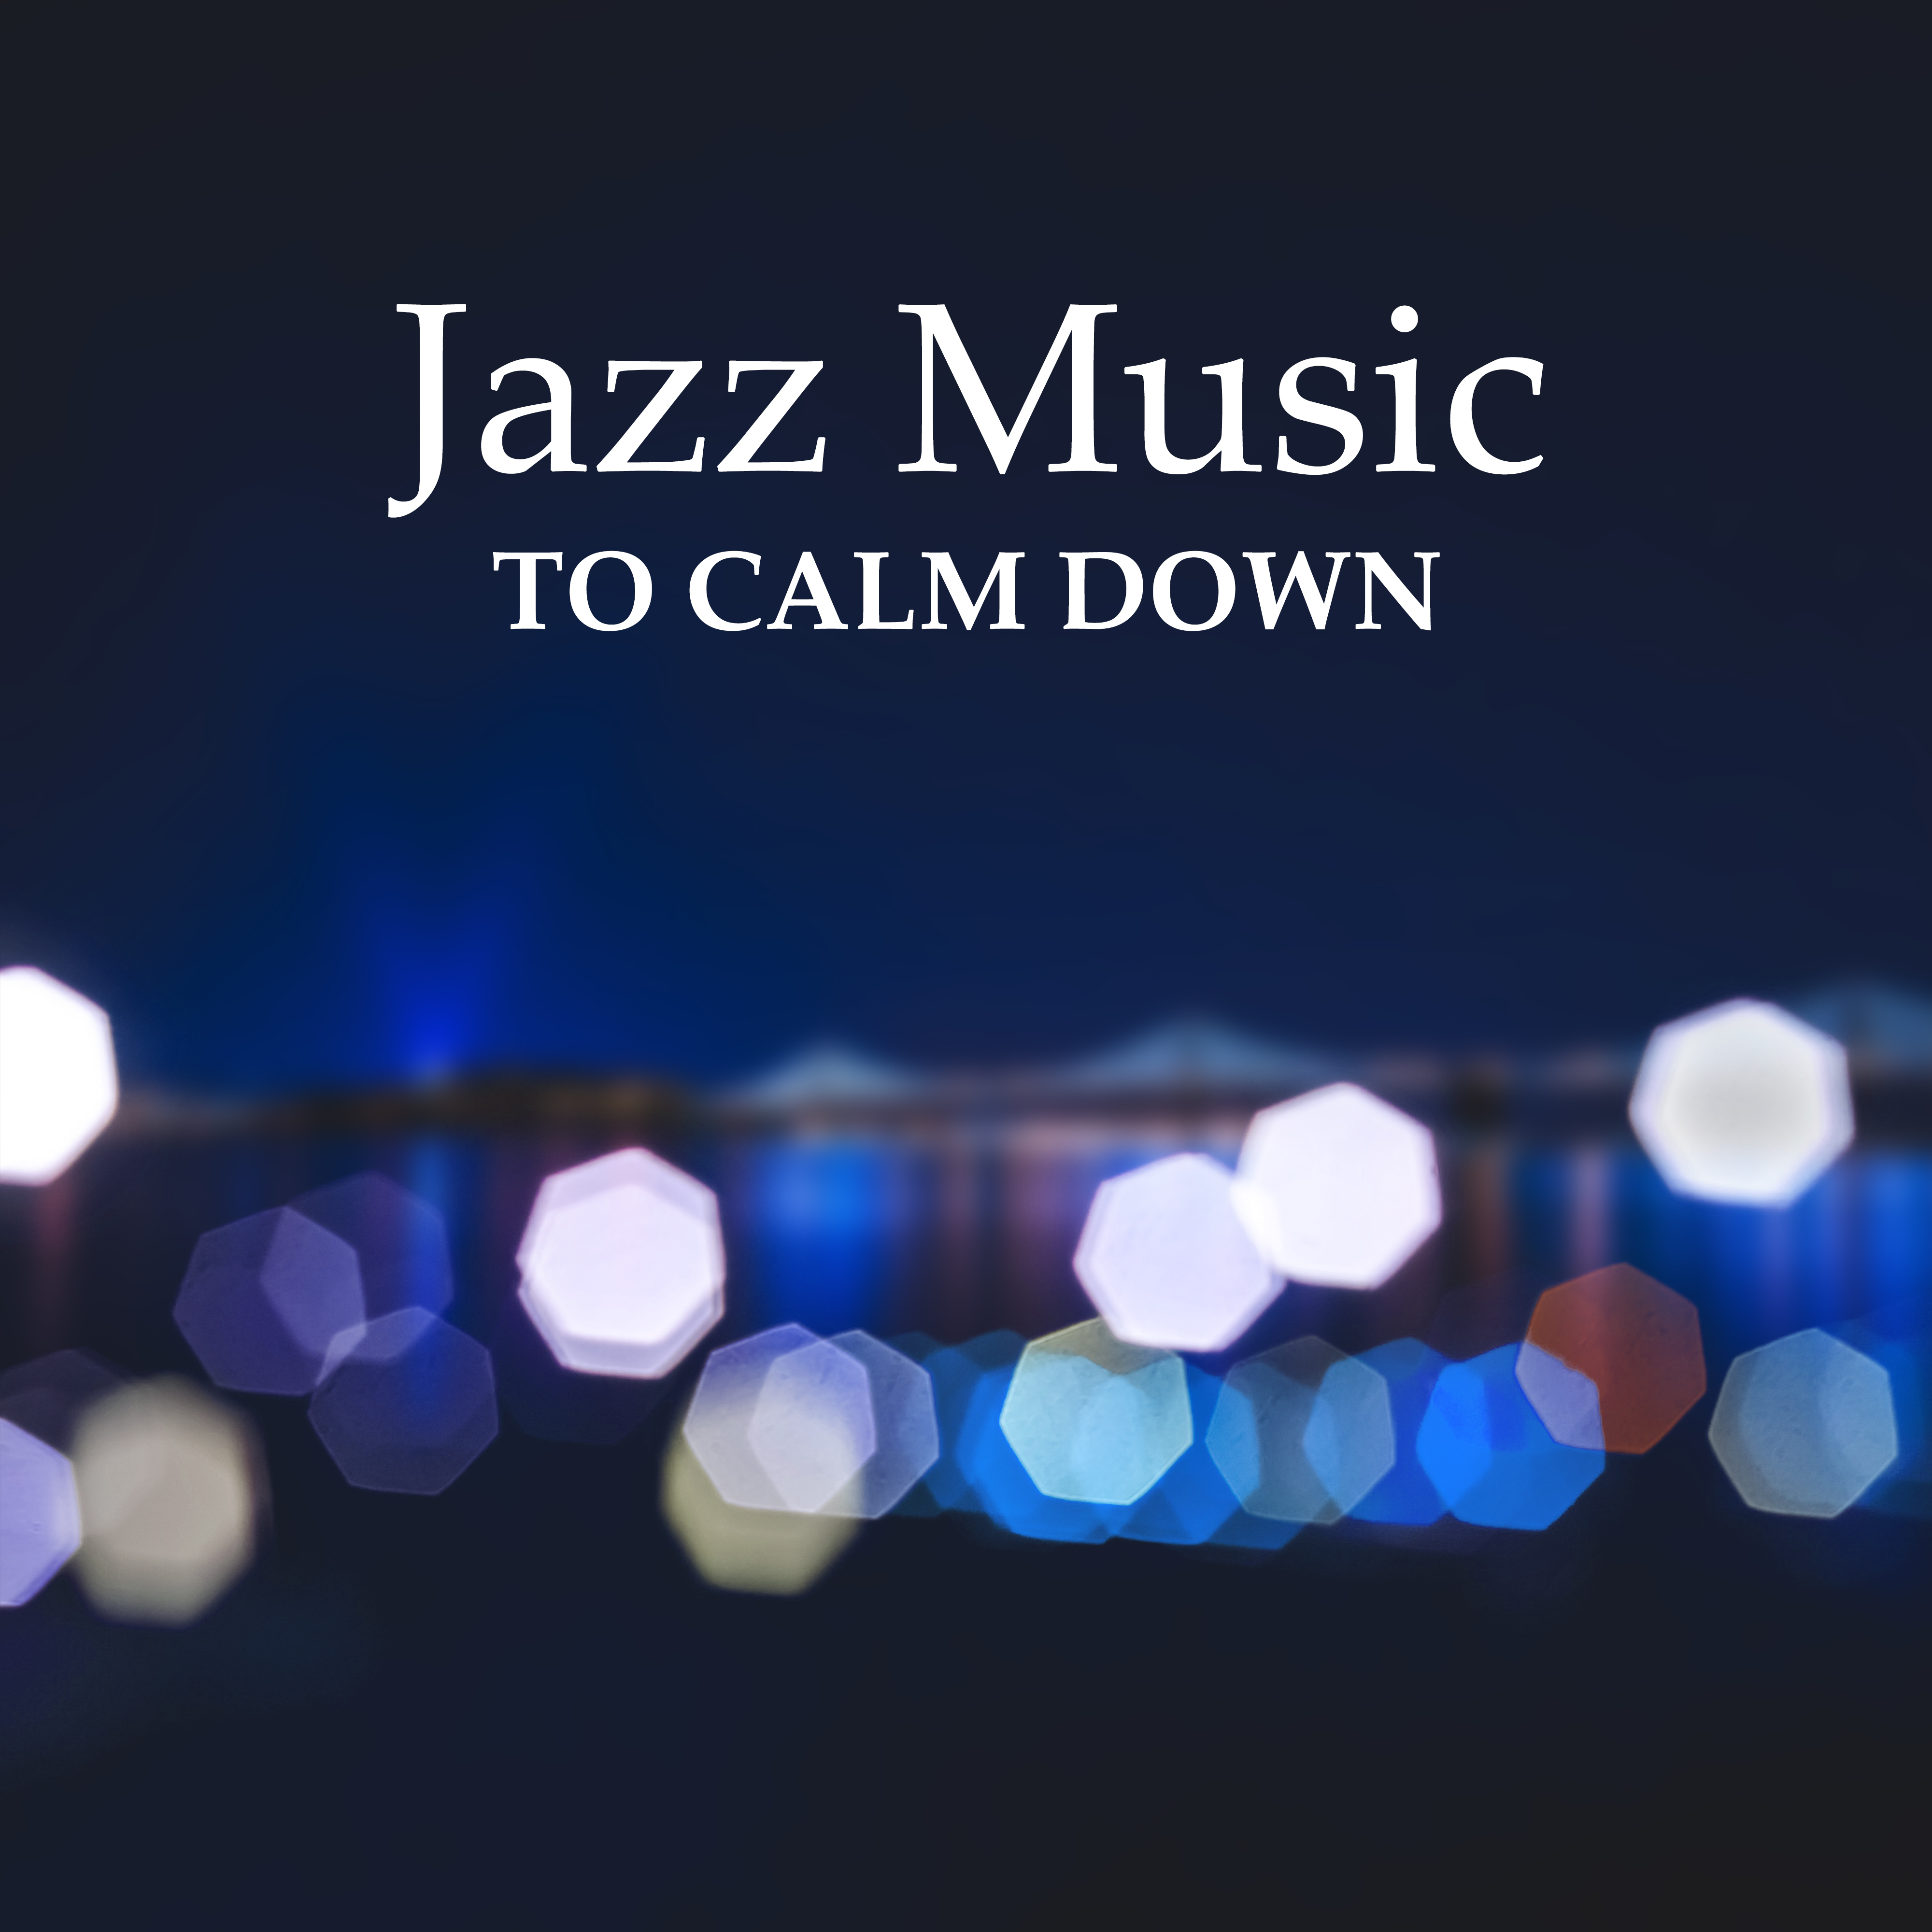 Jazz Music to Calm Down  Restful Jazz, Easy Listening Piano Bar, Background Sounds, Moonlight Note